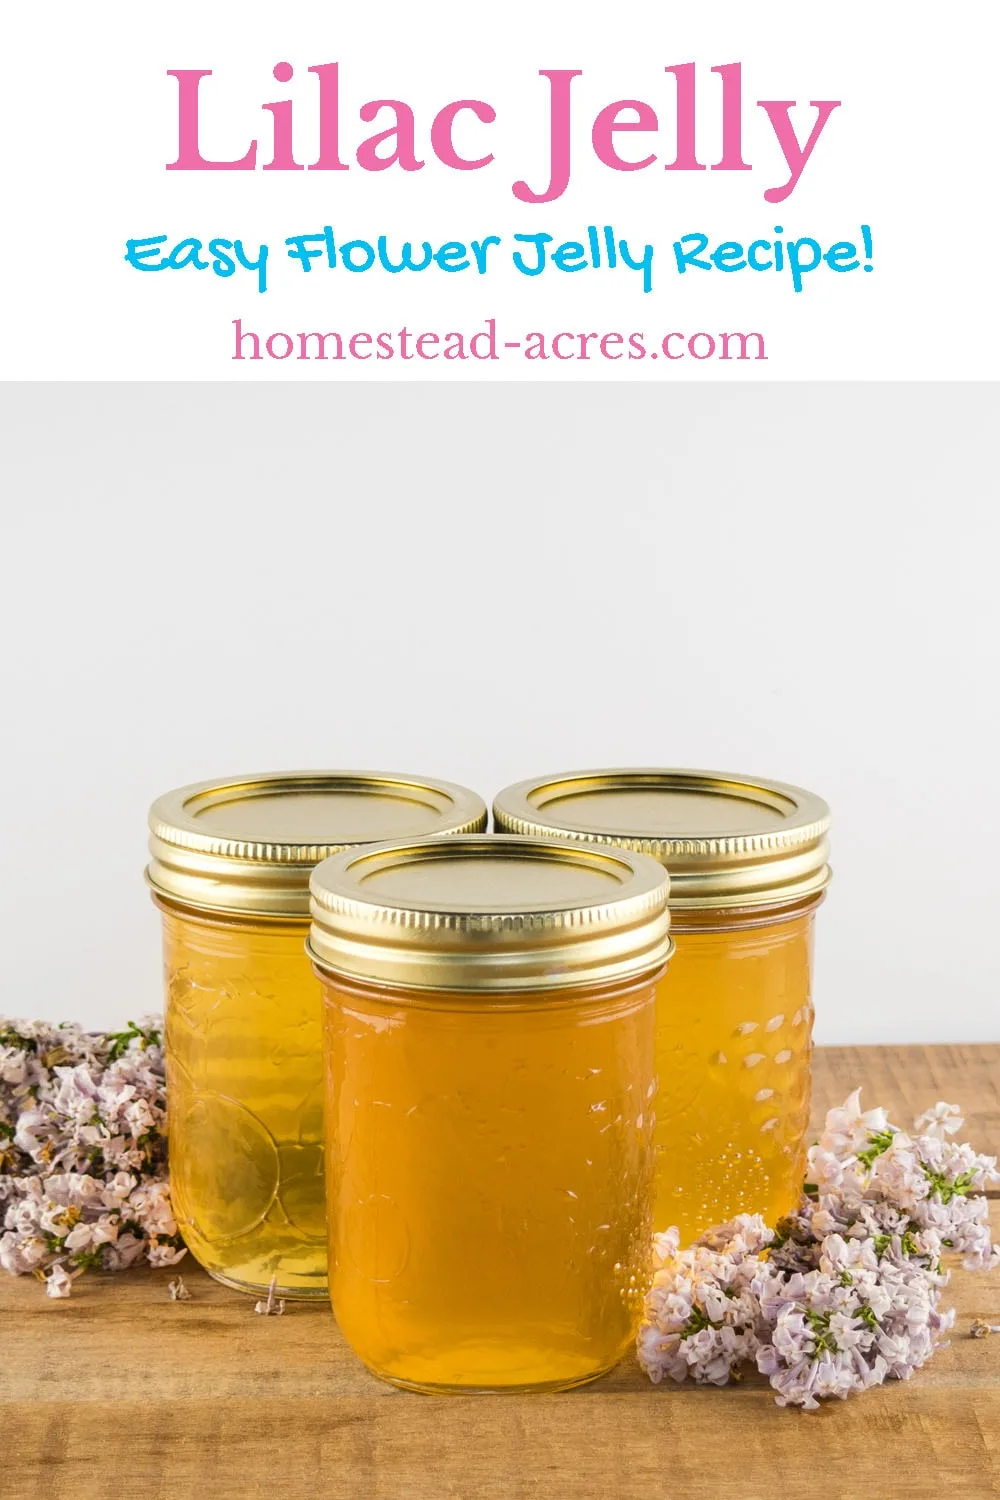 Lilac Jelly - Easy Flower Jelly Recipe! text overlaid on top of a photo of yellow lilac jelly in canning jars sitting on a table with lilac flowers.